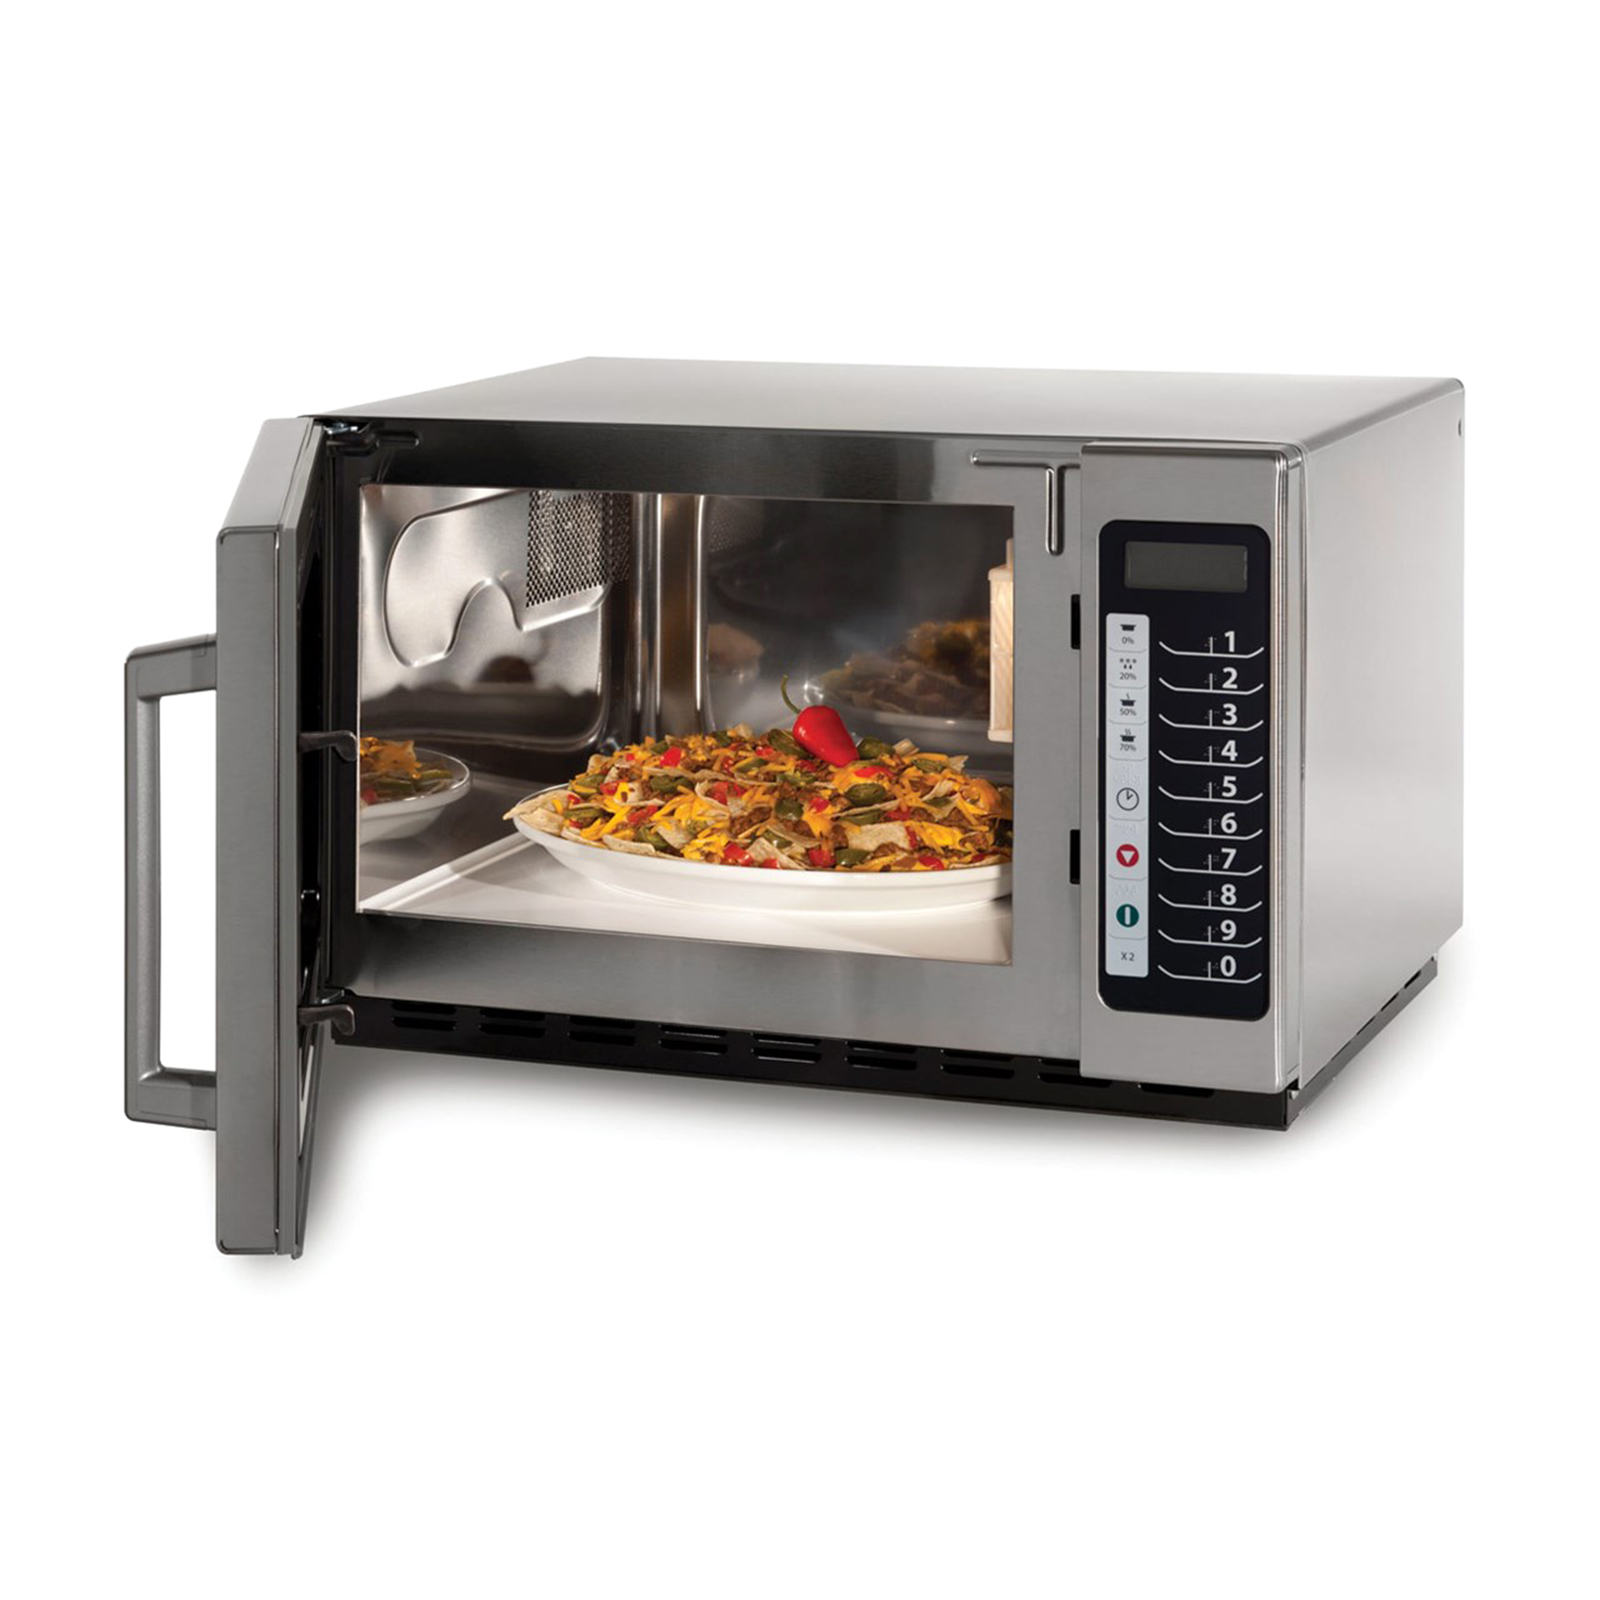 Amana RCS10TS 1000W Commercial Countertop Microwave Oven - Stainless Steel